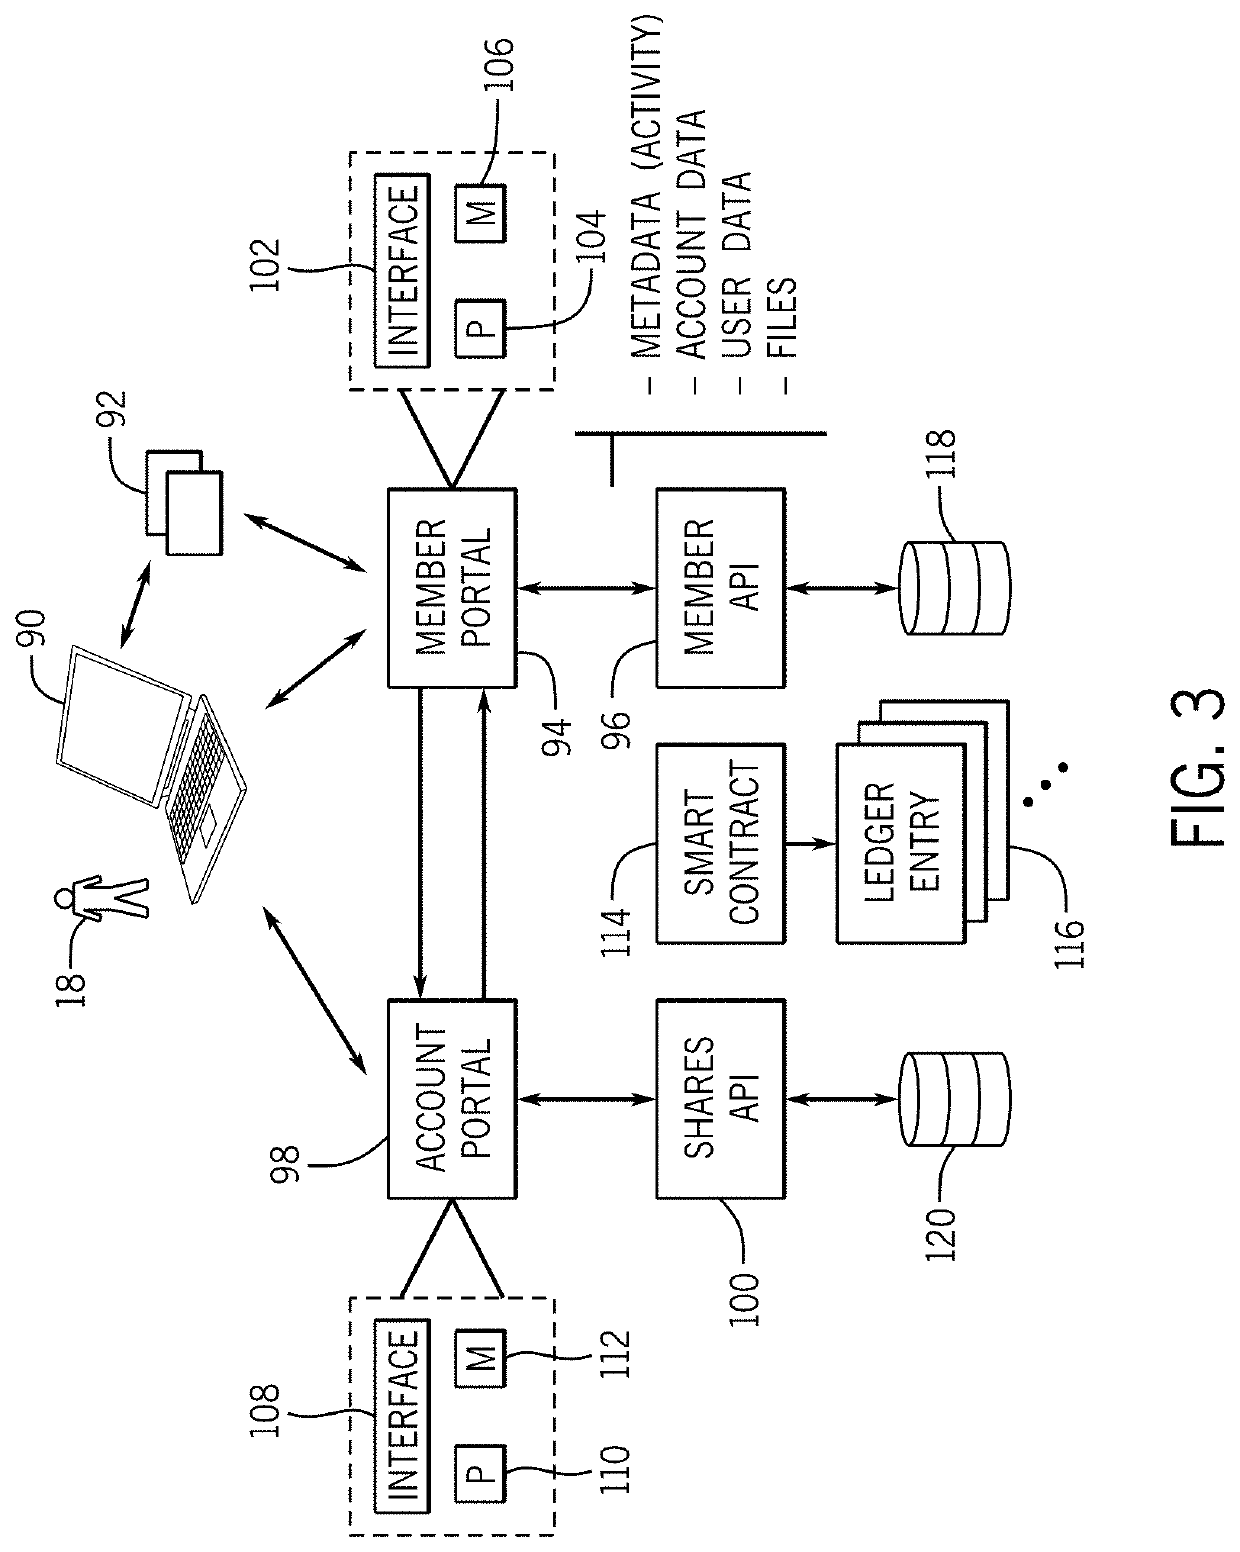 De-identification omic data aggregation platform with permitted third party access